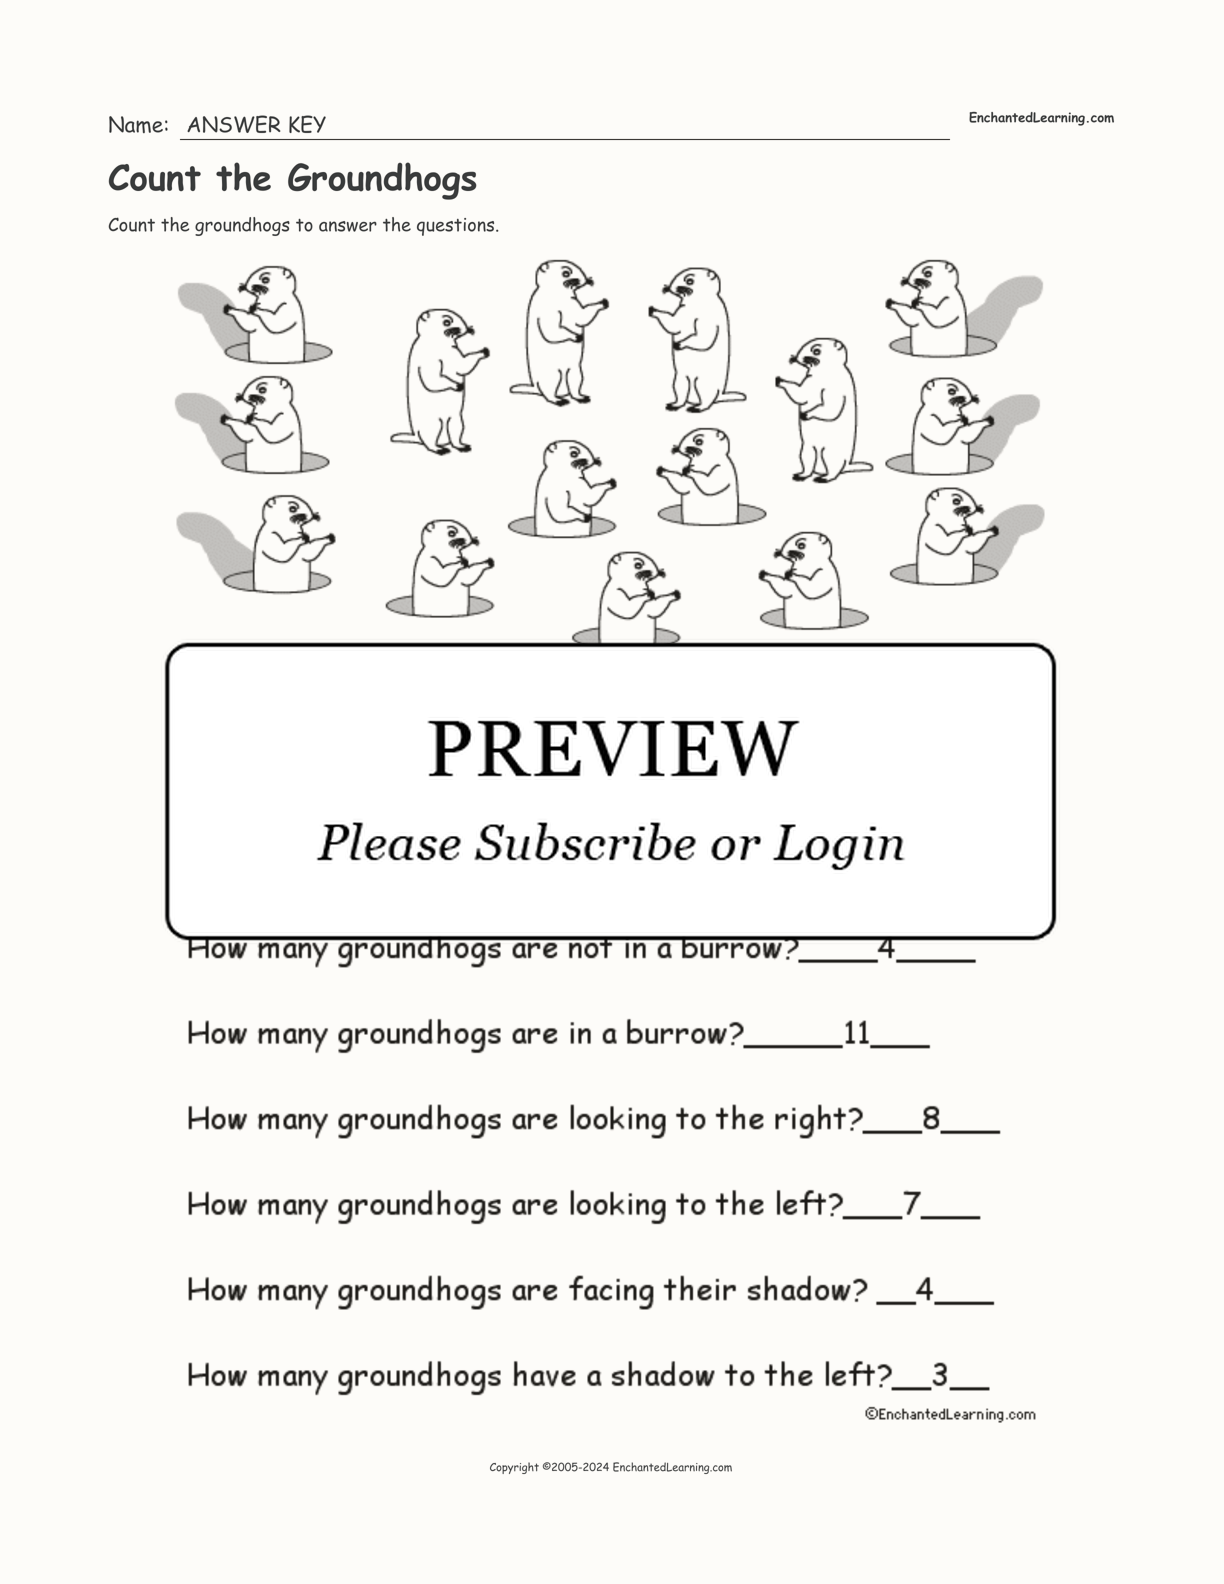 Count the Groundhogs interactive worksheet page 2